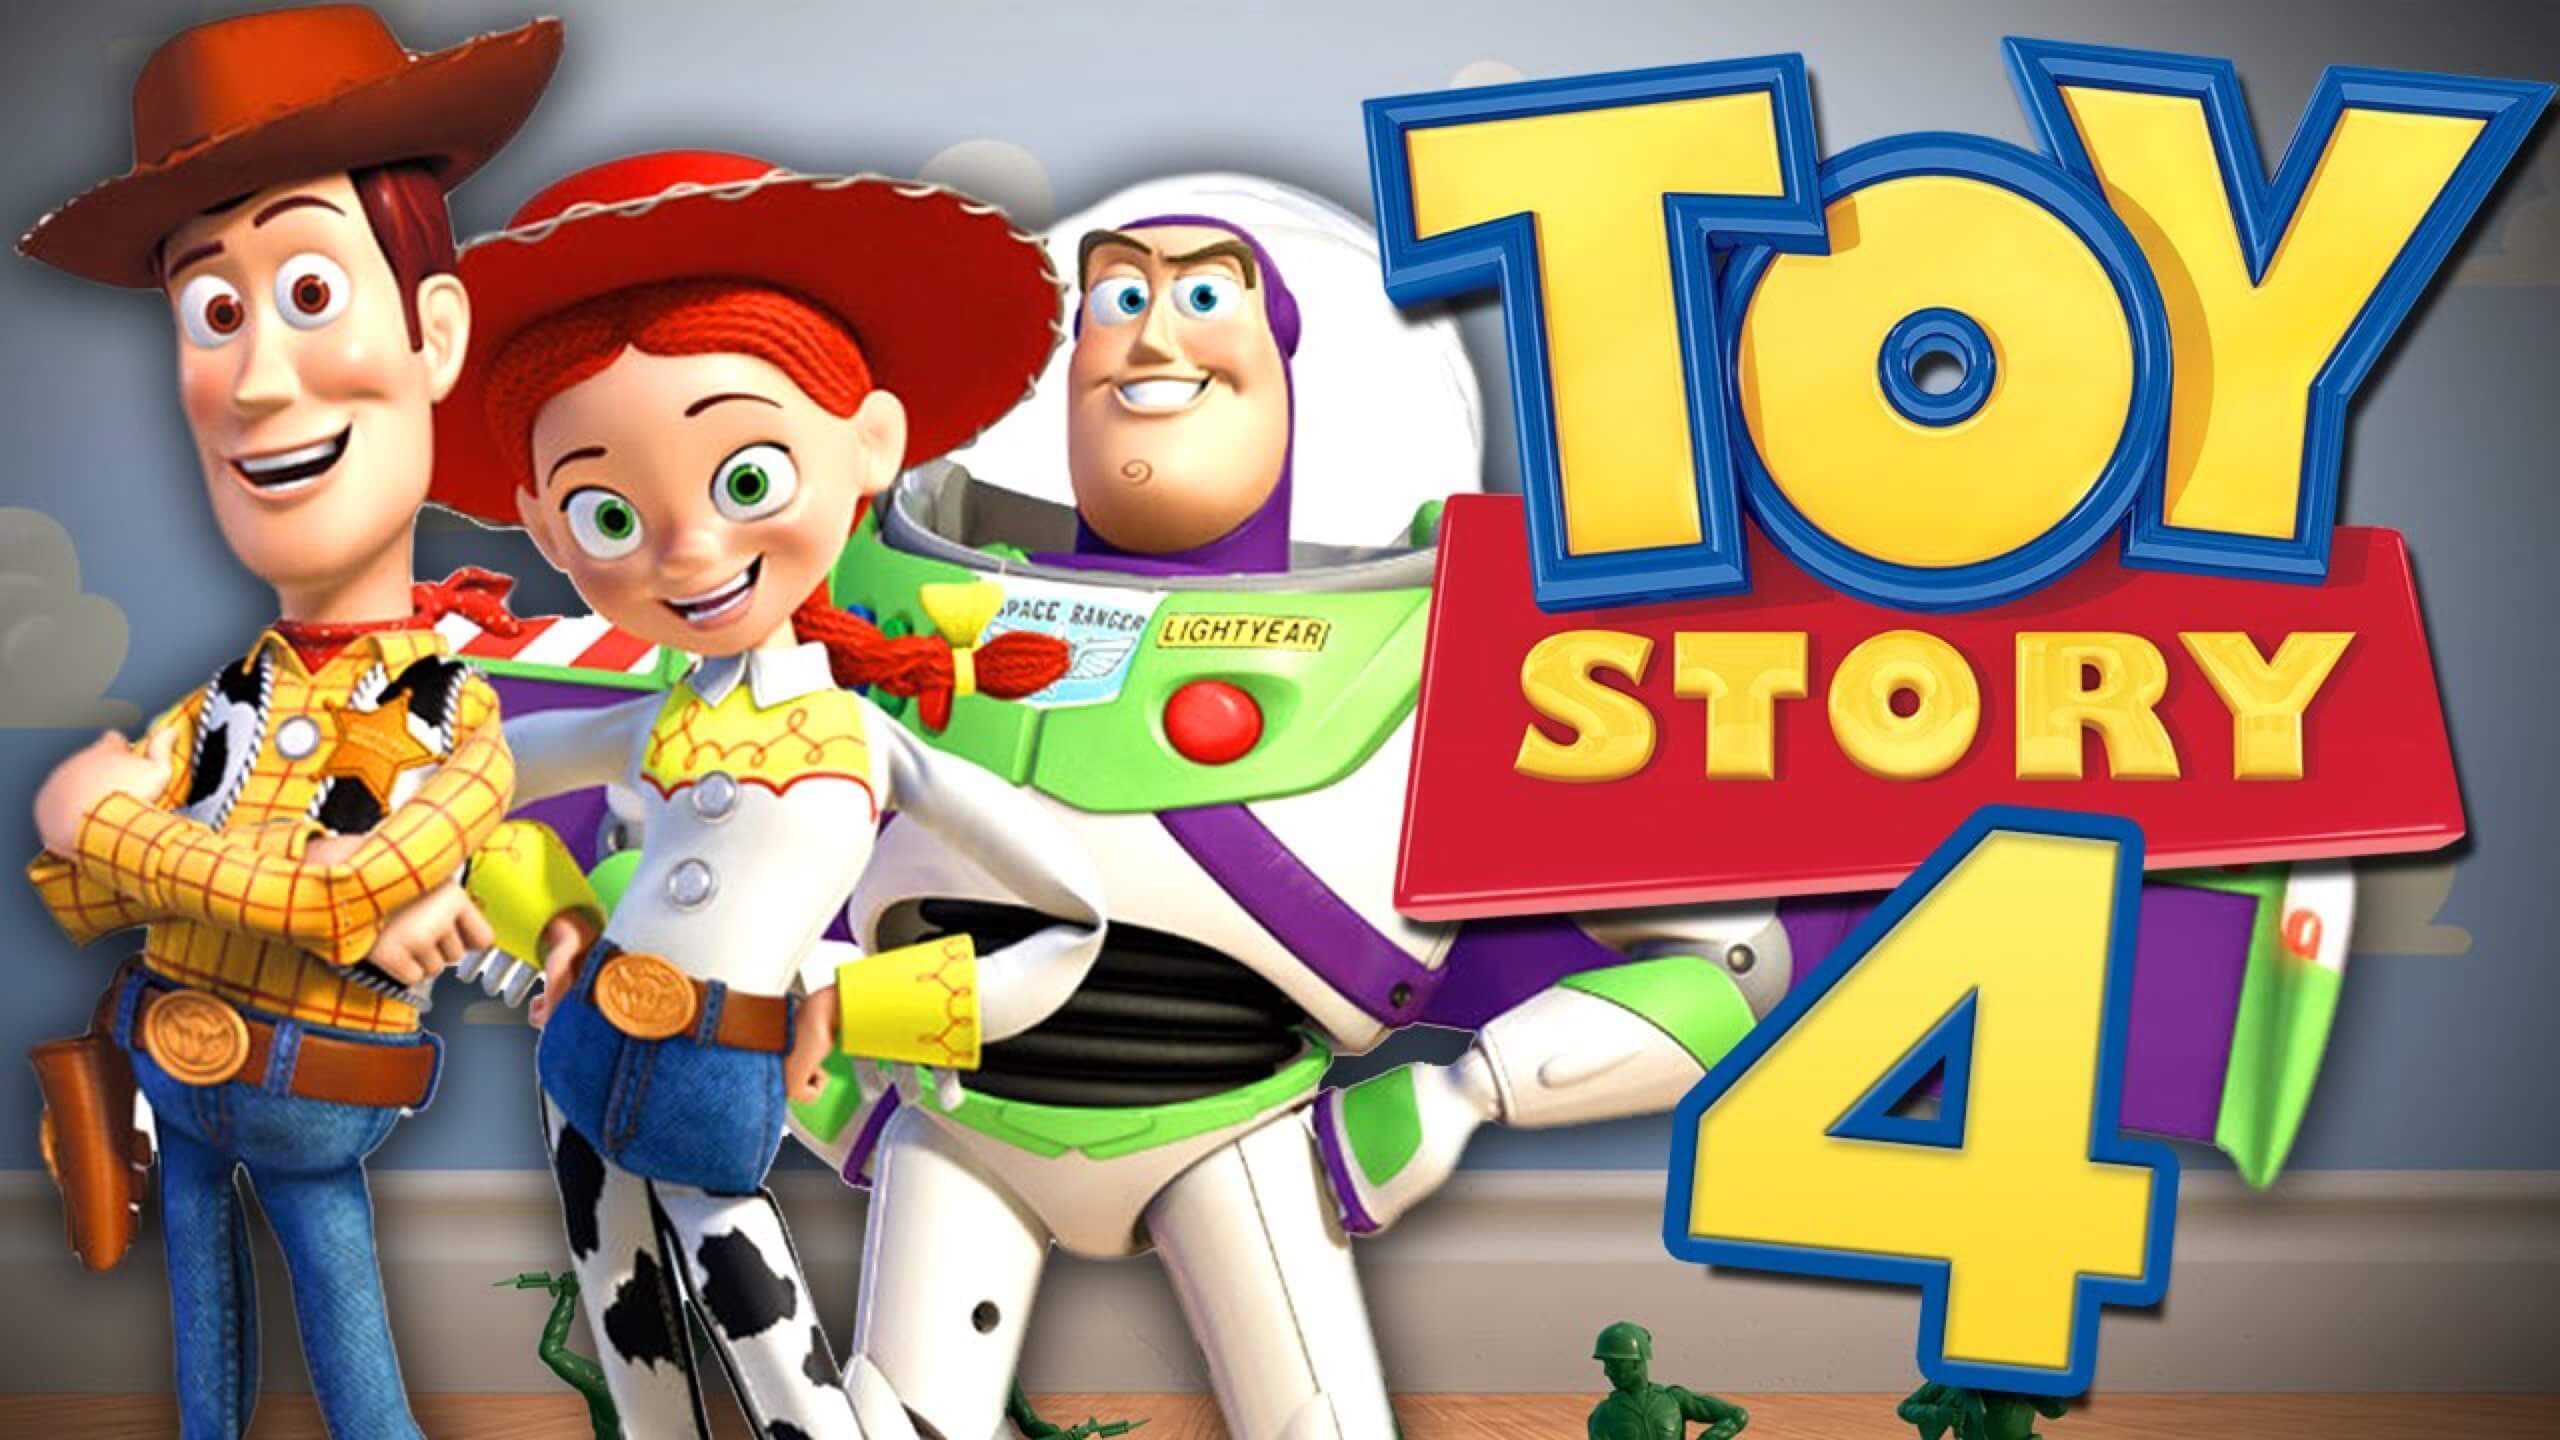 John Lasseter On Why He Isn’t Directing TOY STORY 4!